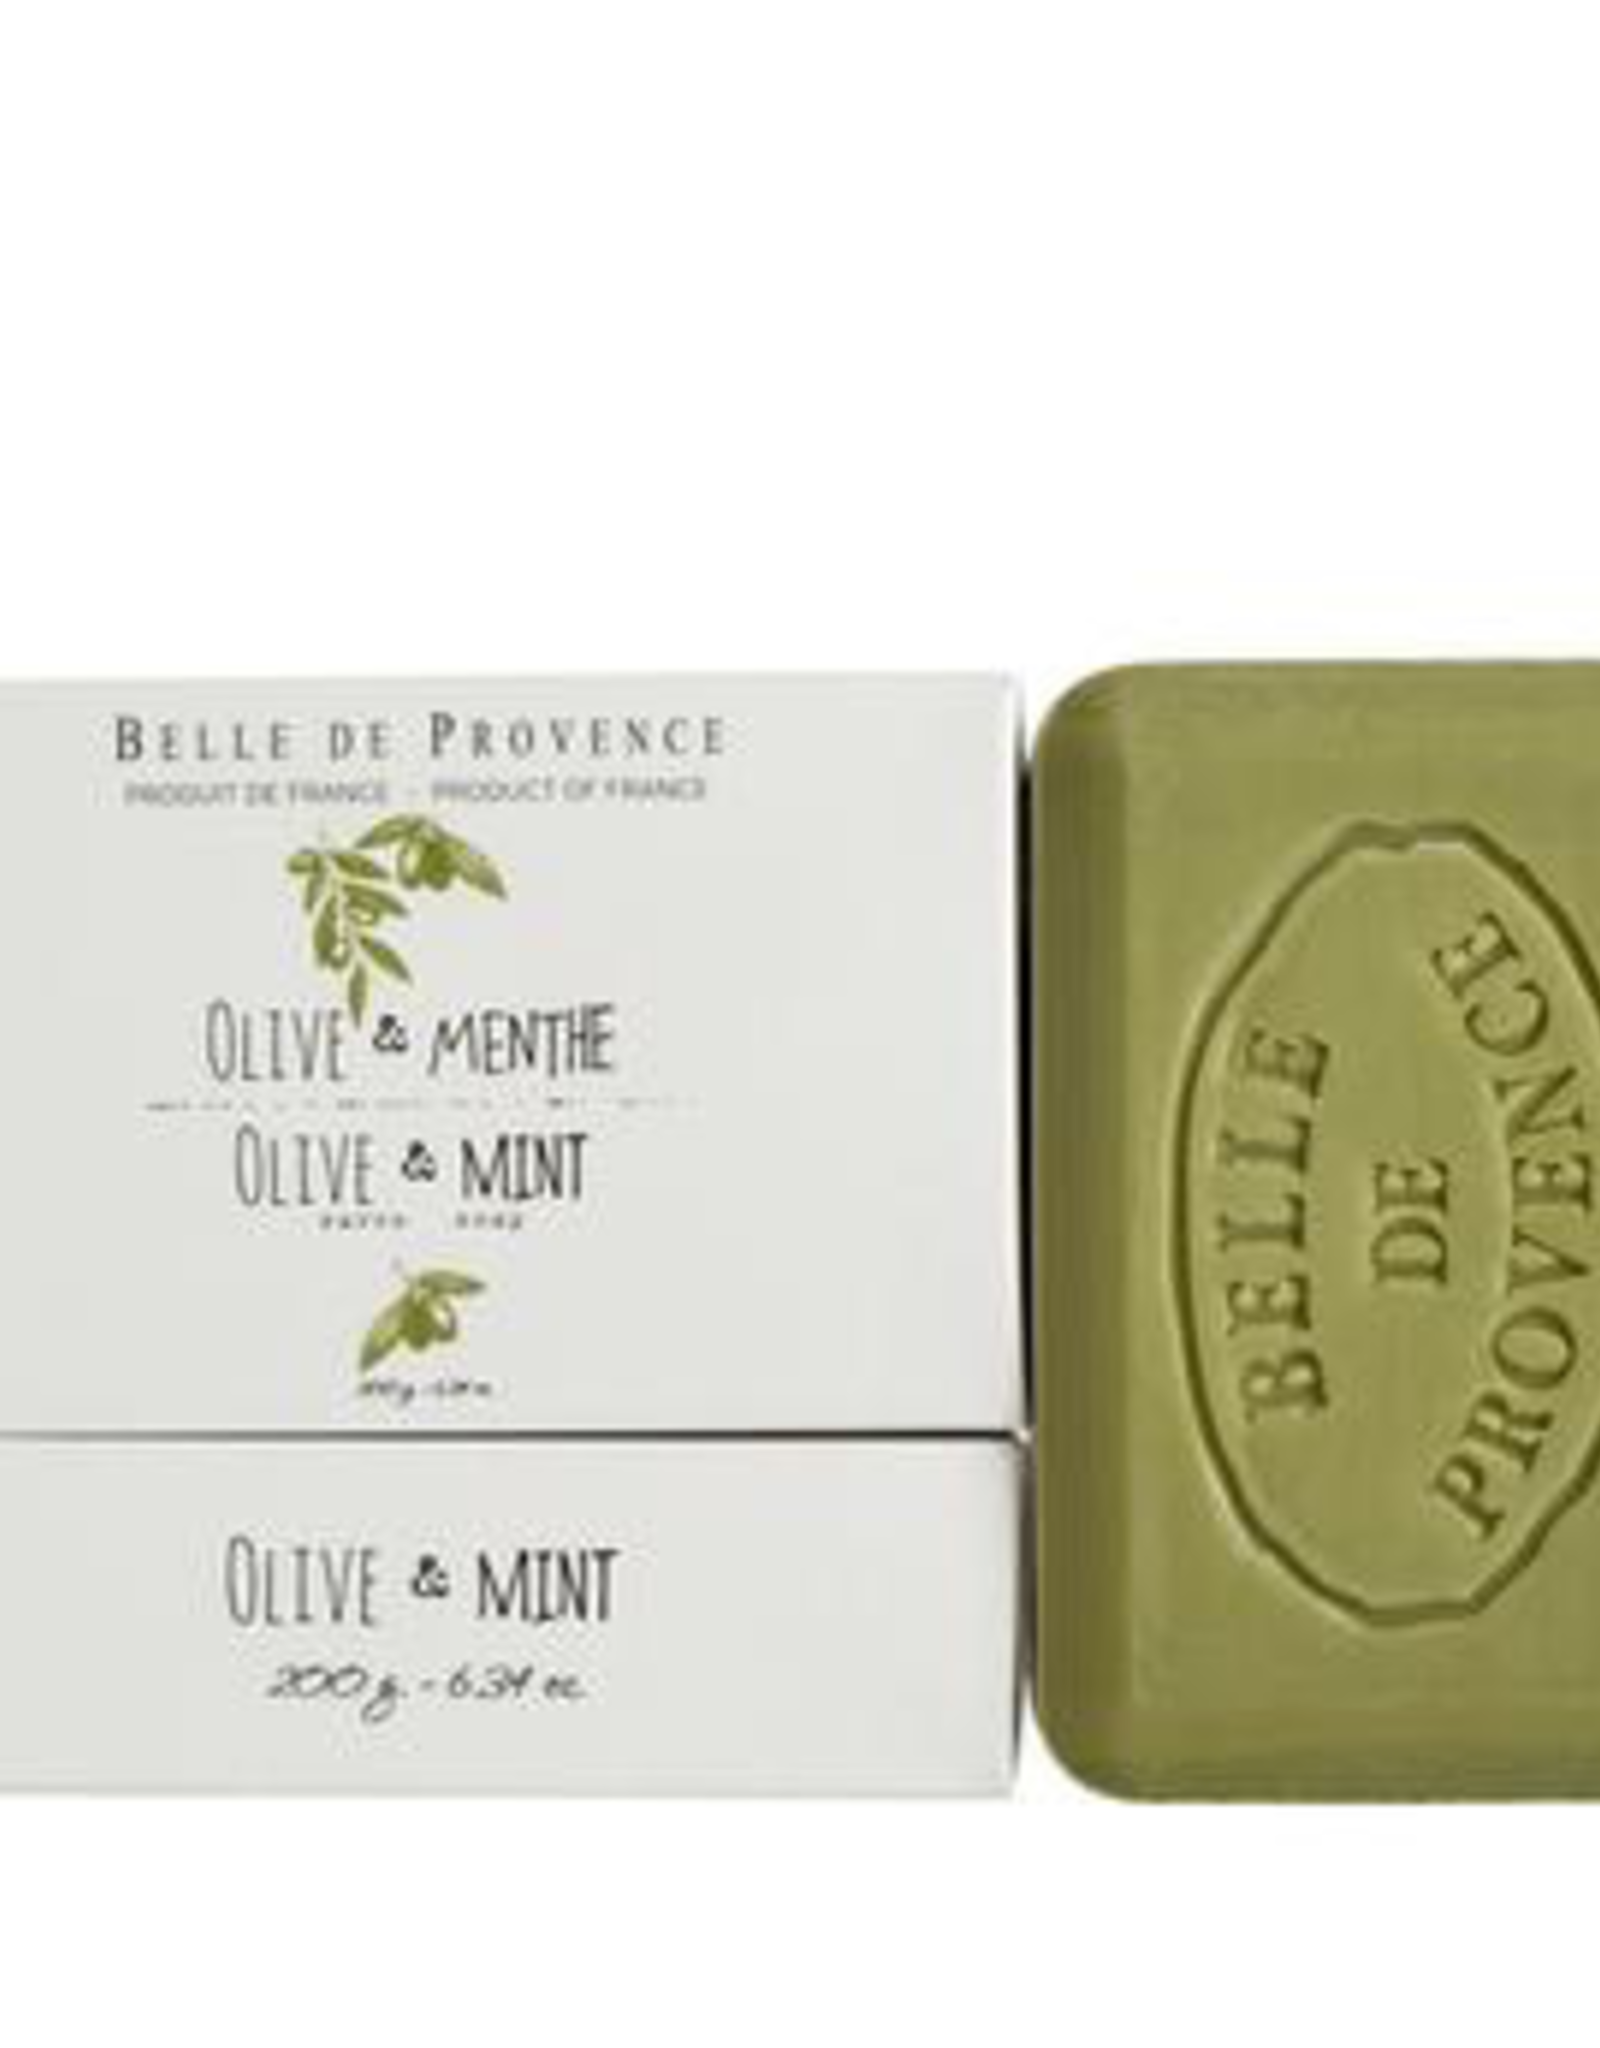 Olive Oil & Mint Soap